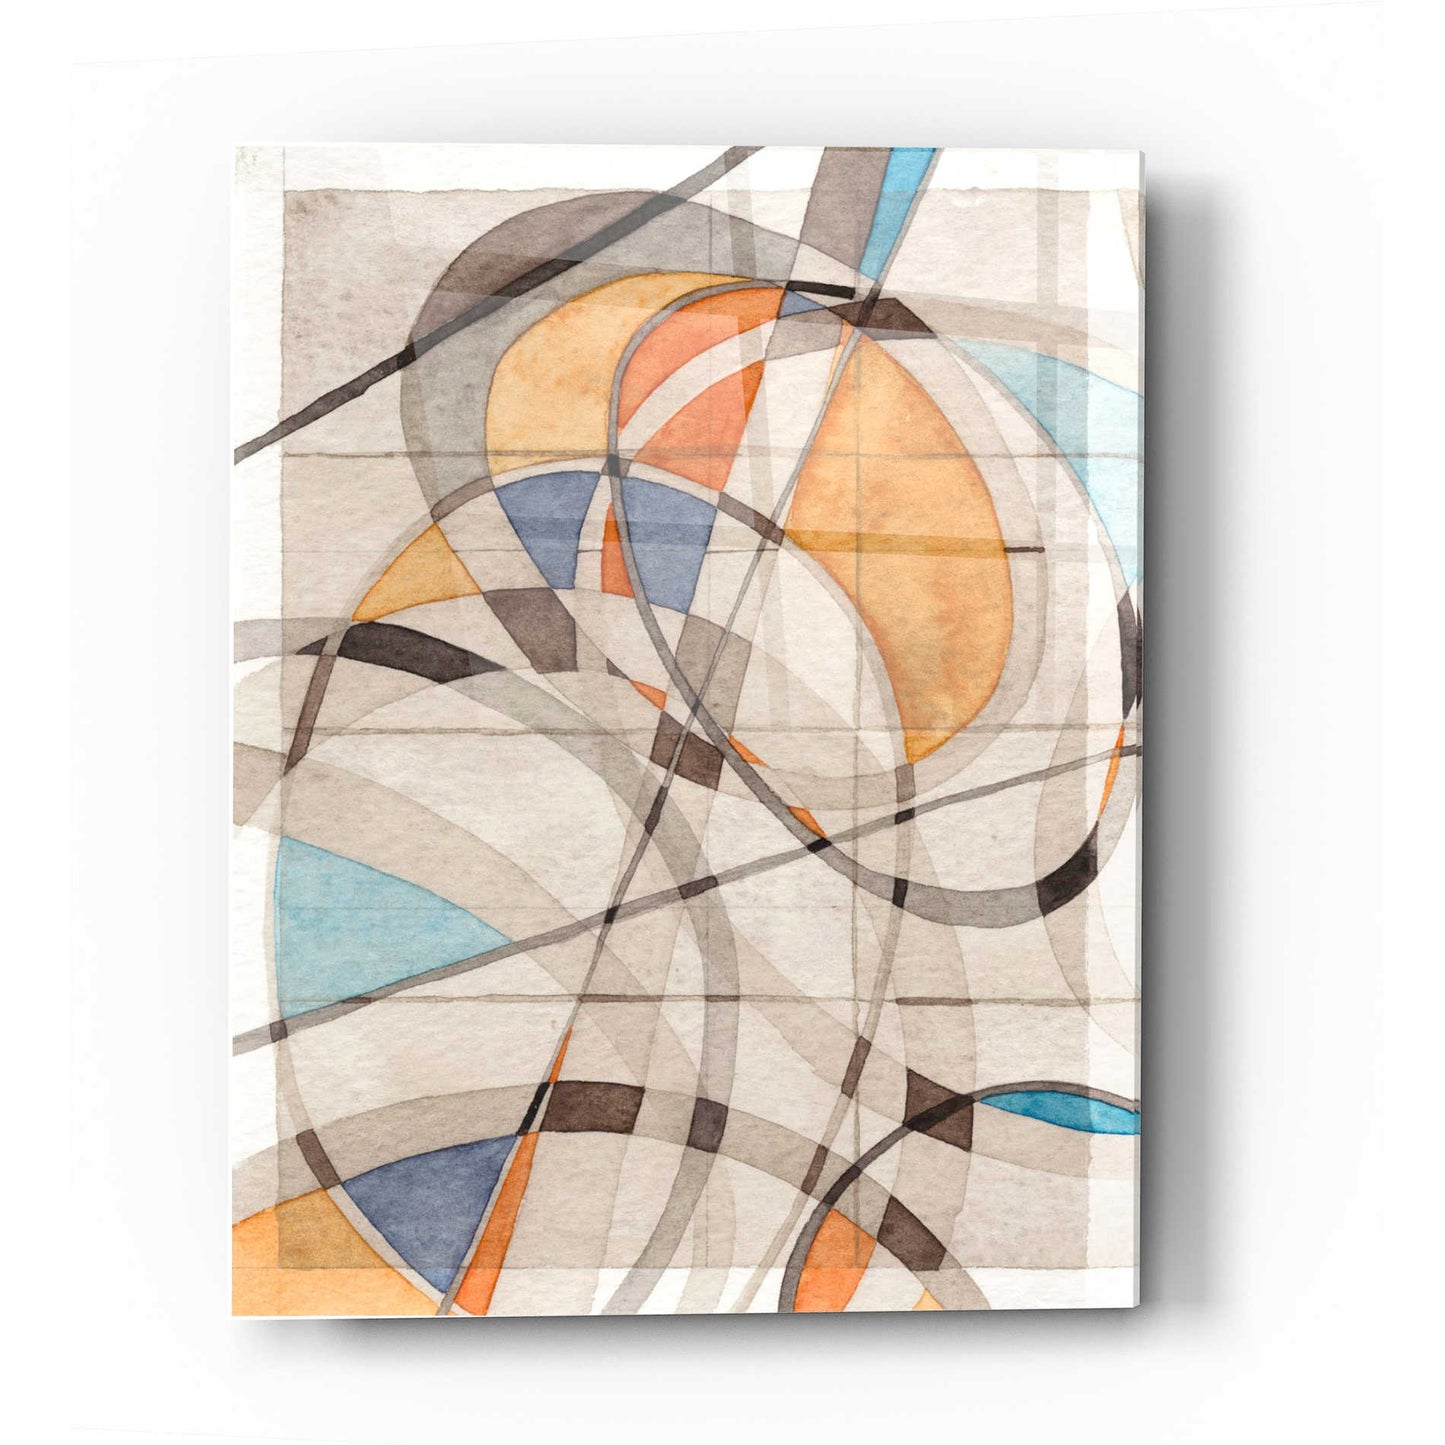 Epic Art 'Ovals & Lines I' by Nikki Galapon Acrylic Glass Wall Art